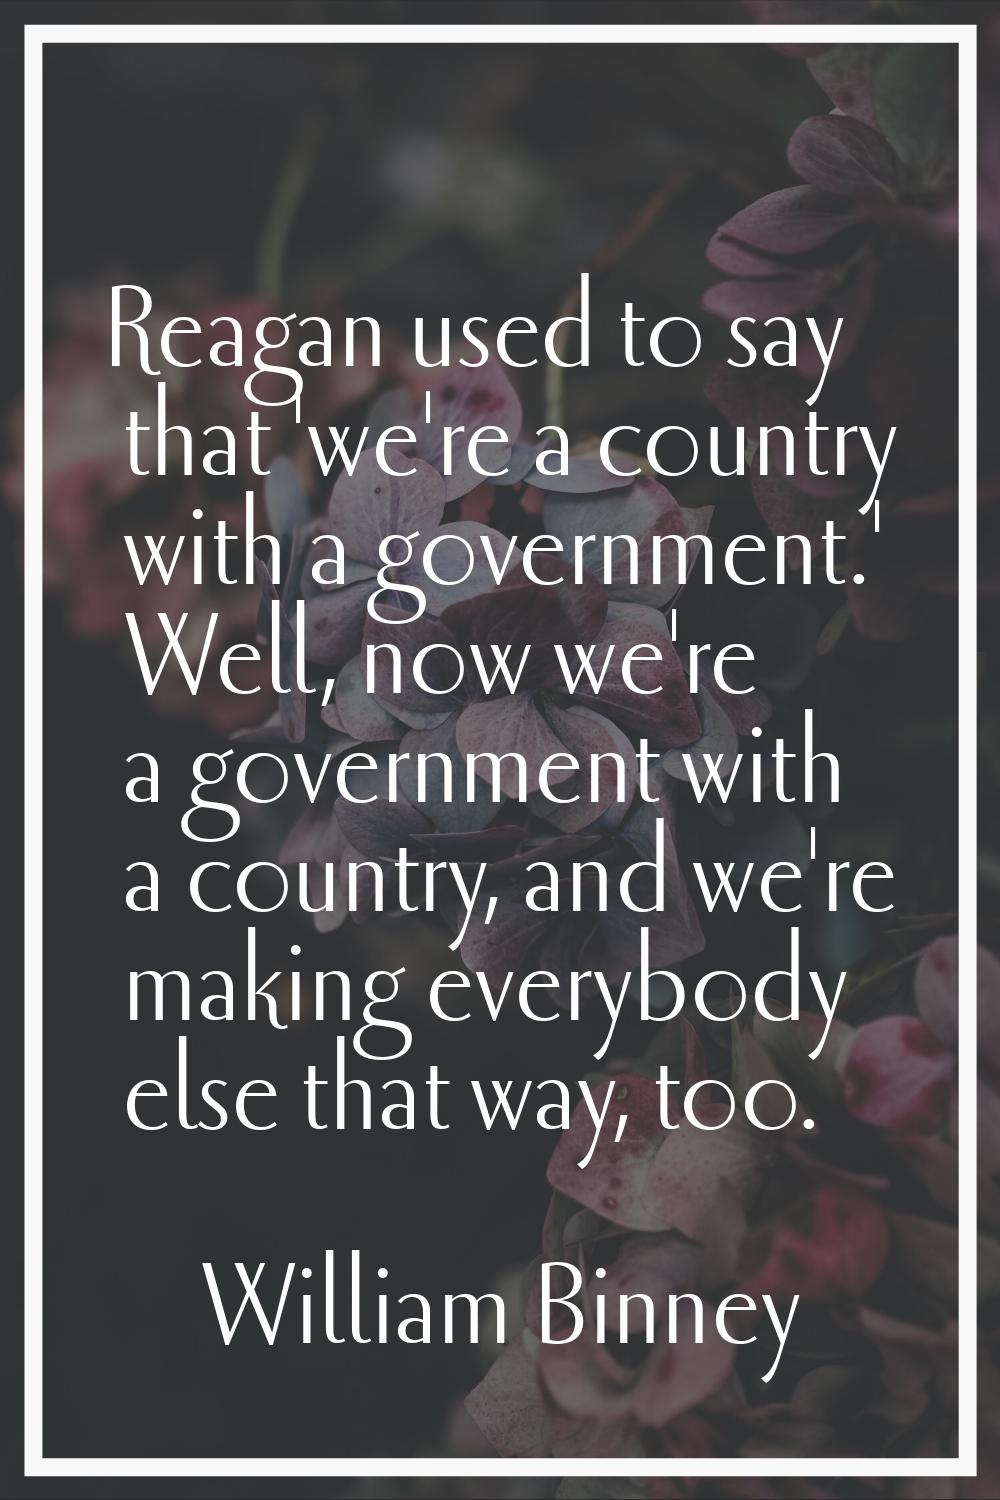 Reagan used to say that 'we're a country with a government.' Well, now we're a government with a co